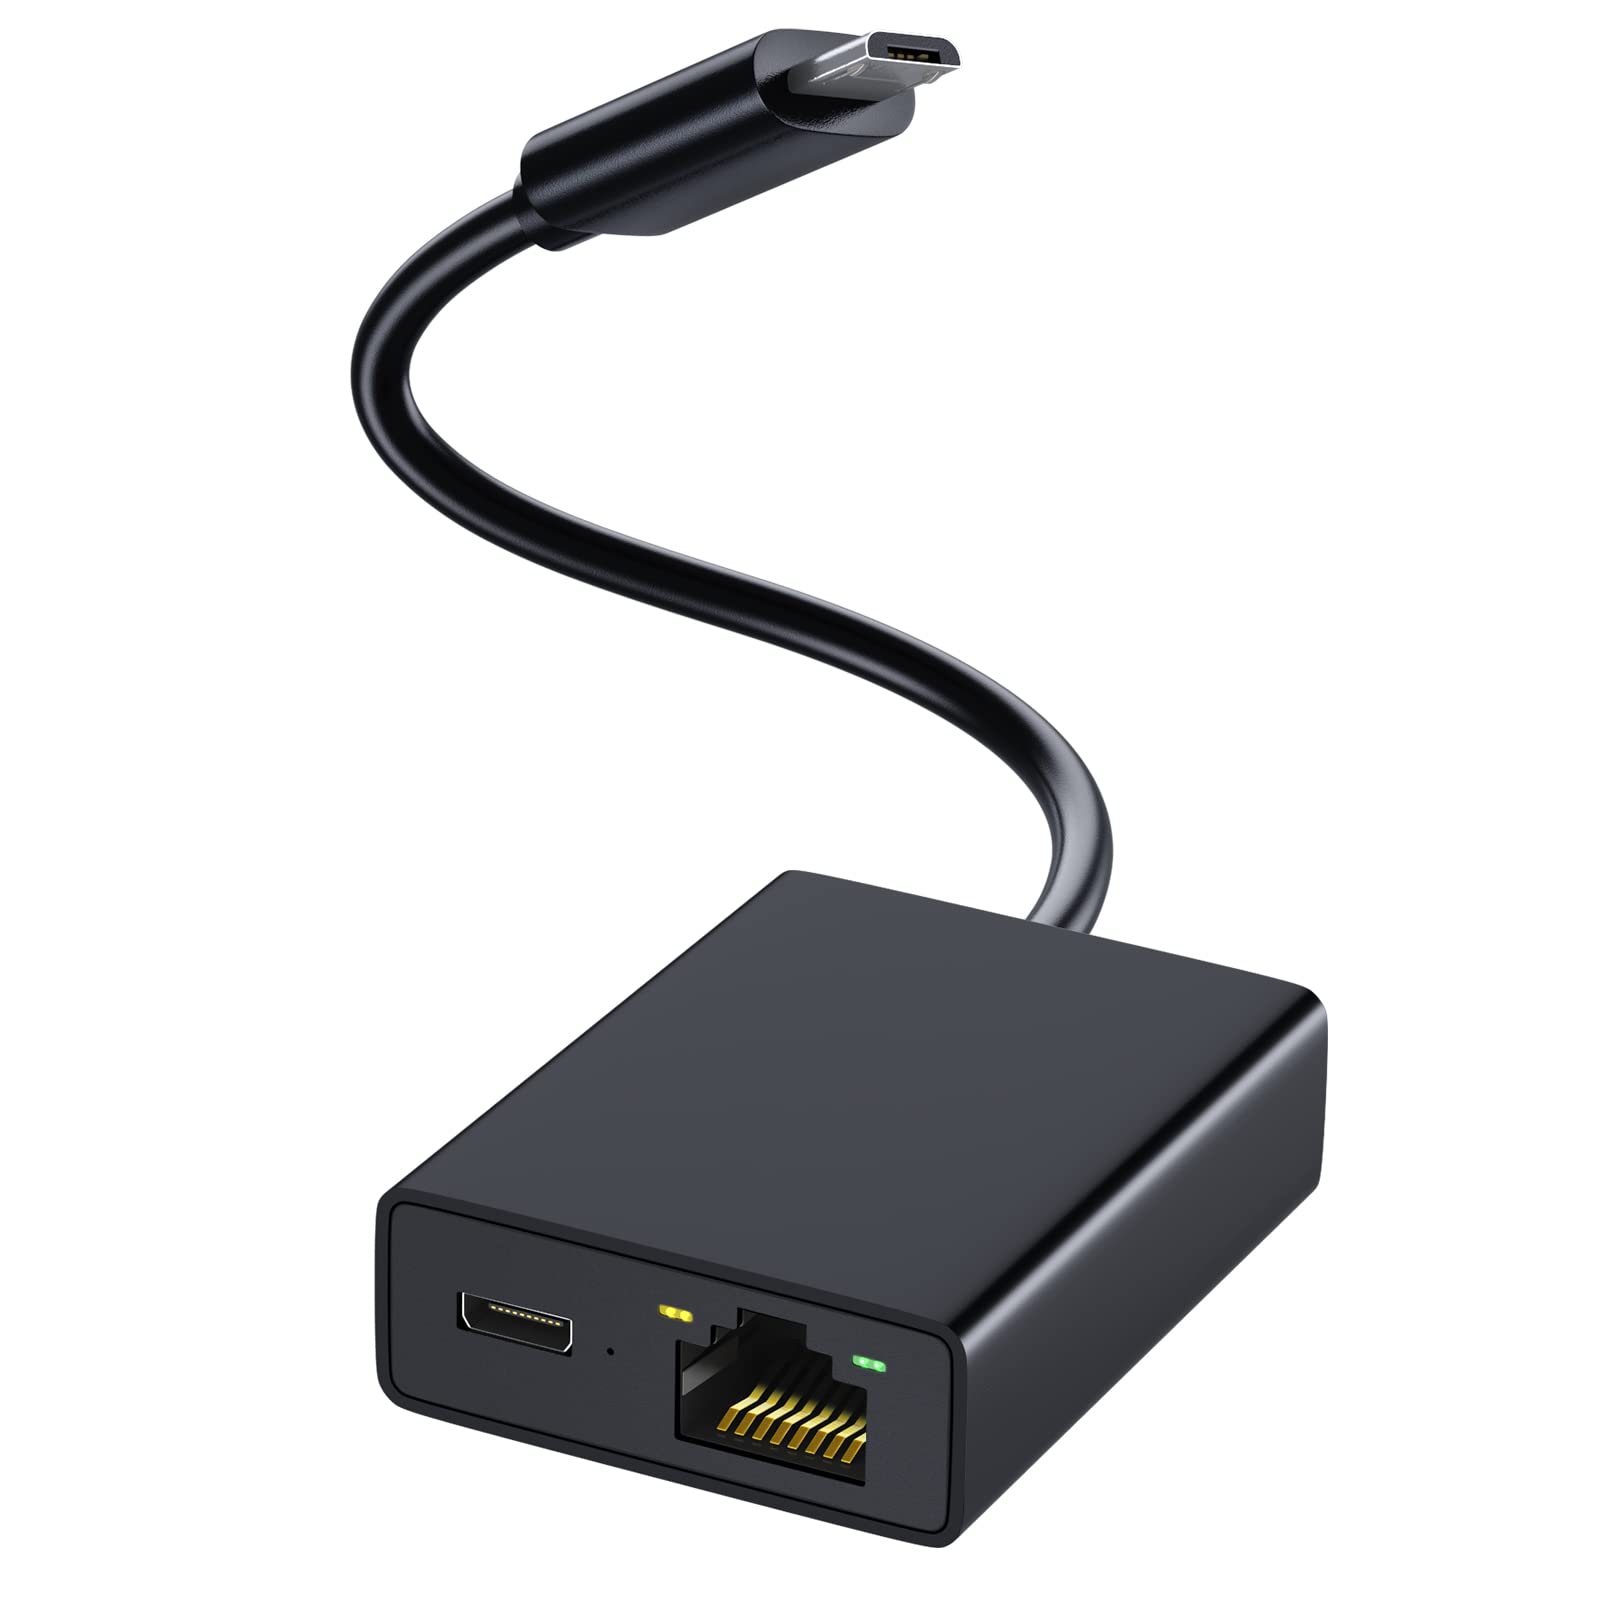 Purchase an Ethernet adapter compatible with the Firestick.
Connect one end of the Ethernet cable to the adapter and the other end to the router.